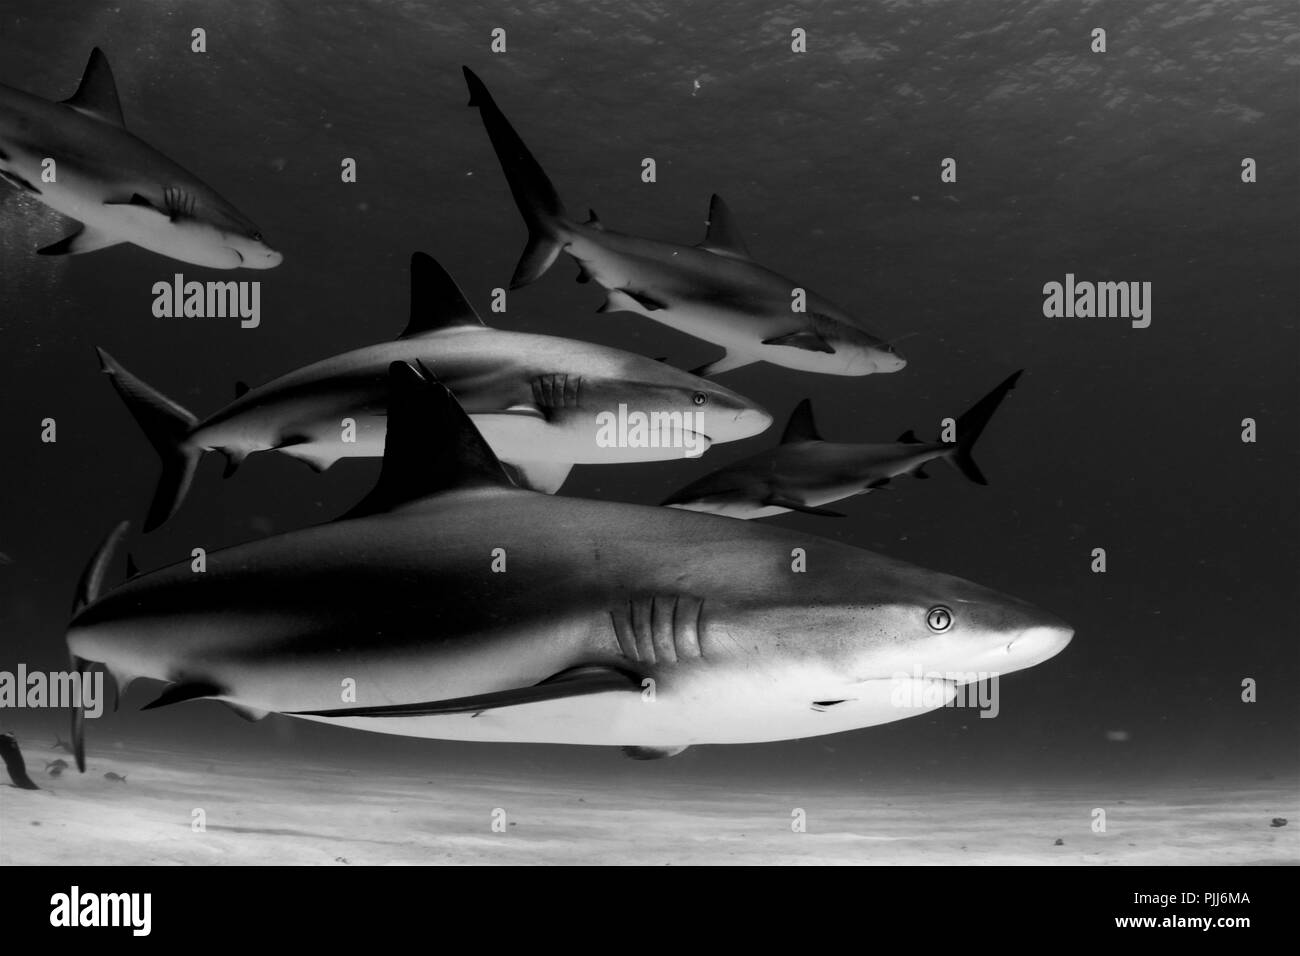 Group of fish island Black and White Stock Photos & Images - Alamy